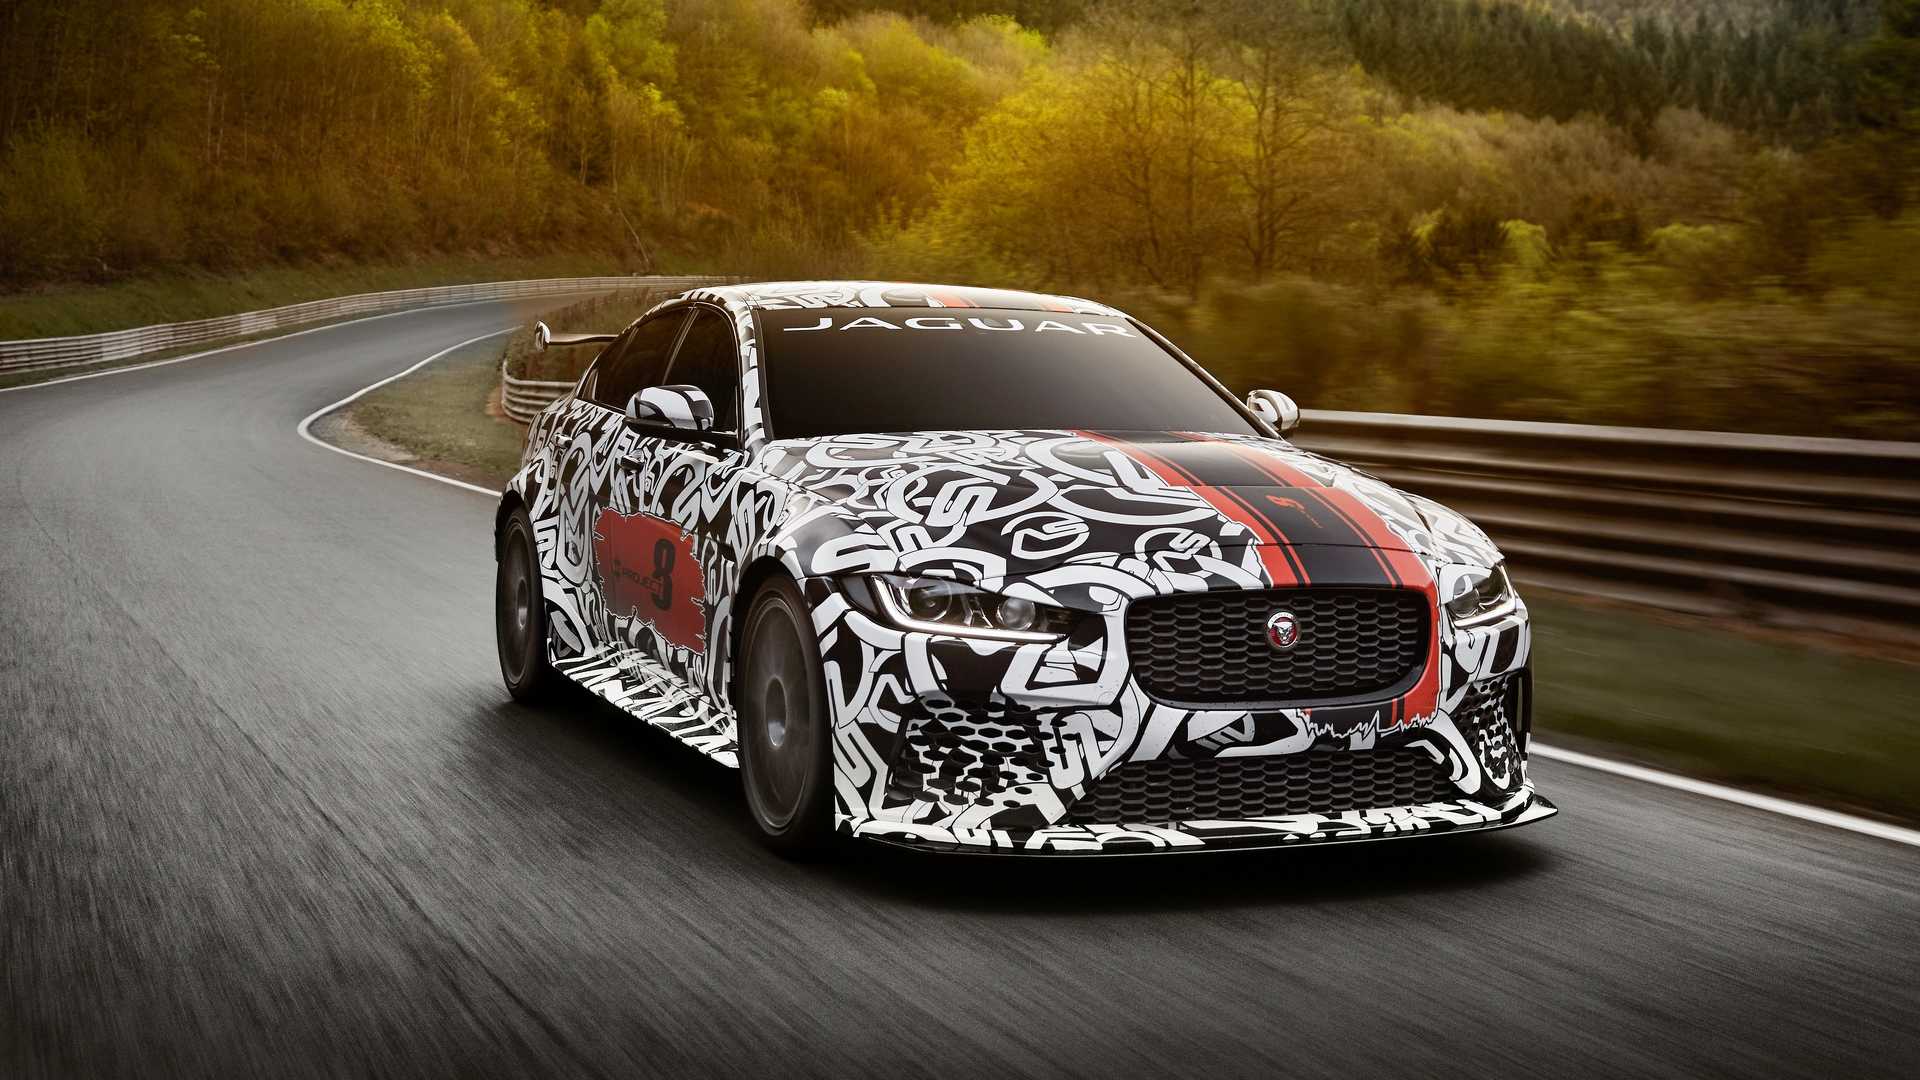 Jaguar XE SV Project 8 Becomes Brand's Most Powerful Car Ever